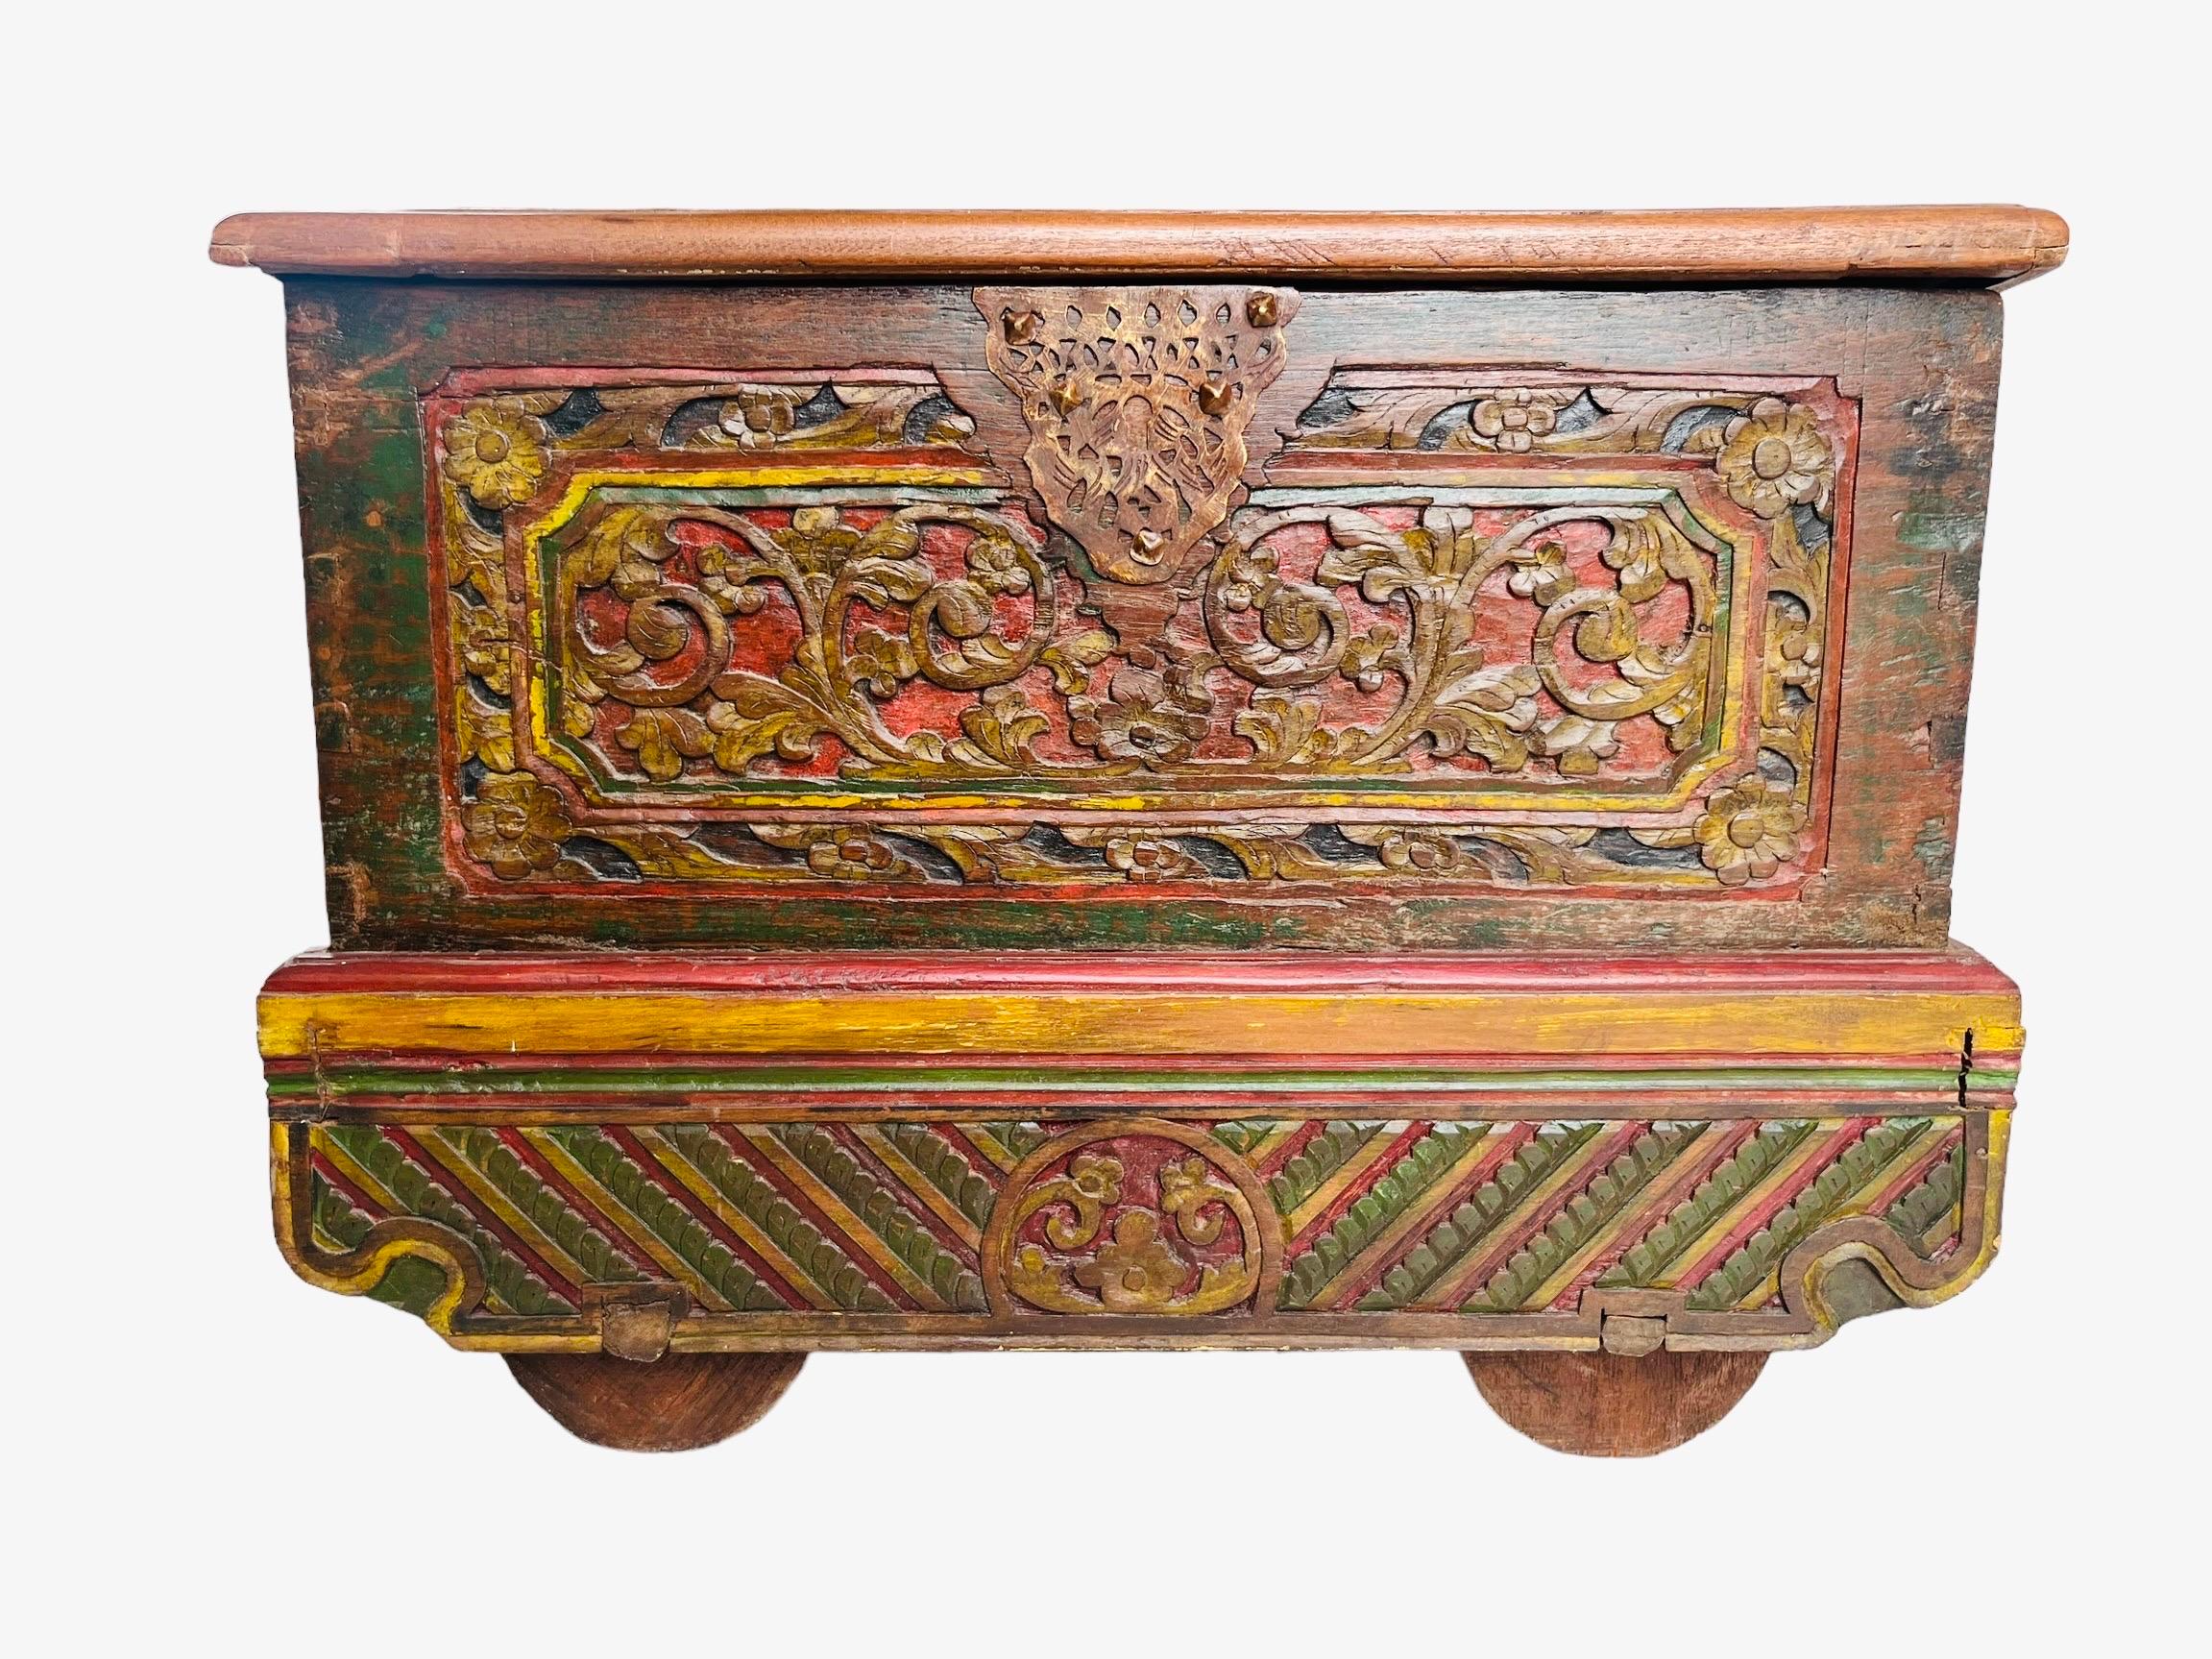 Very pretty blanket chest on wheels for an Indonesian merchant from the end of the 19th century, from Madura.
The hand-painted and carved facade features superb plant and floral motifs.
Created in Madura, off the northeast coast of Java, in the late